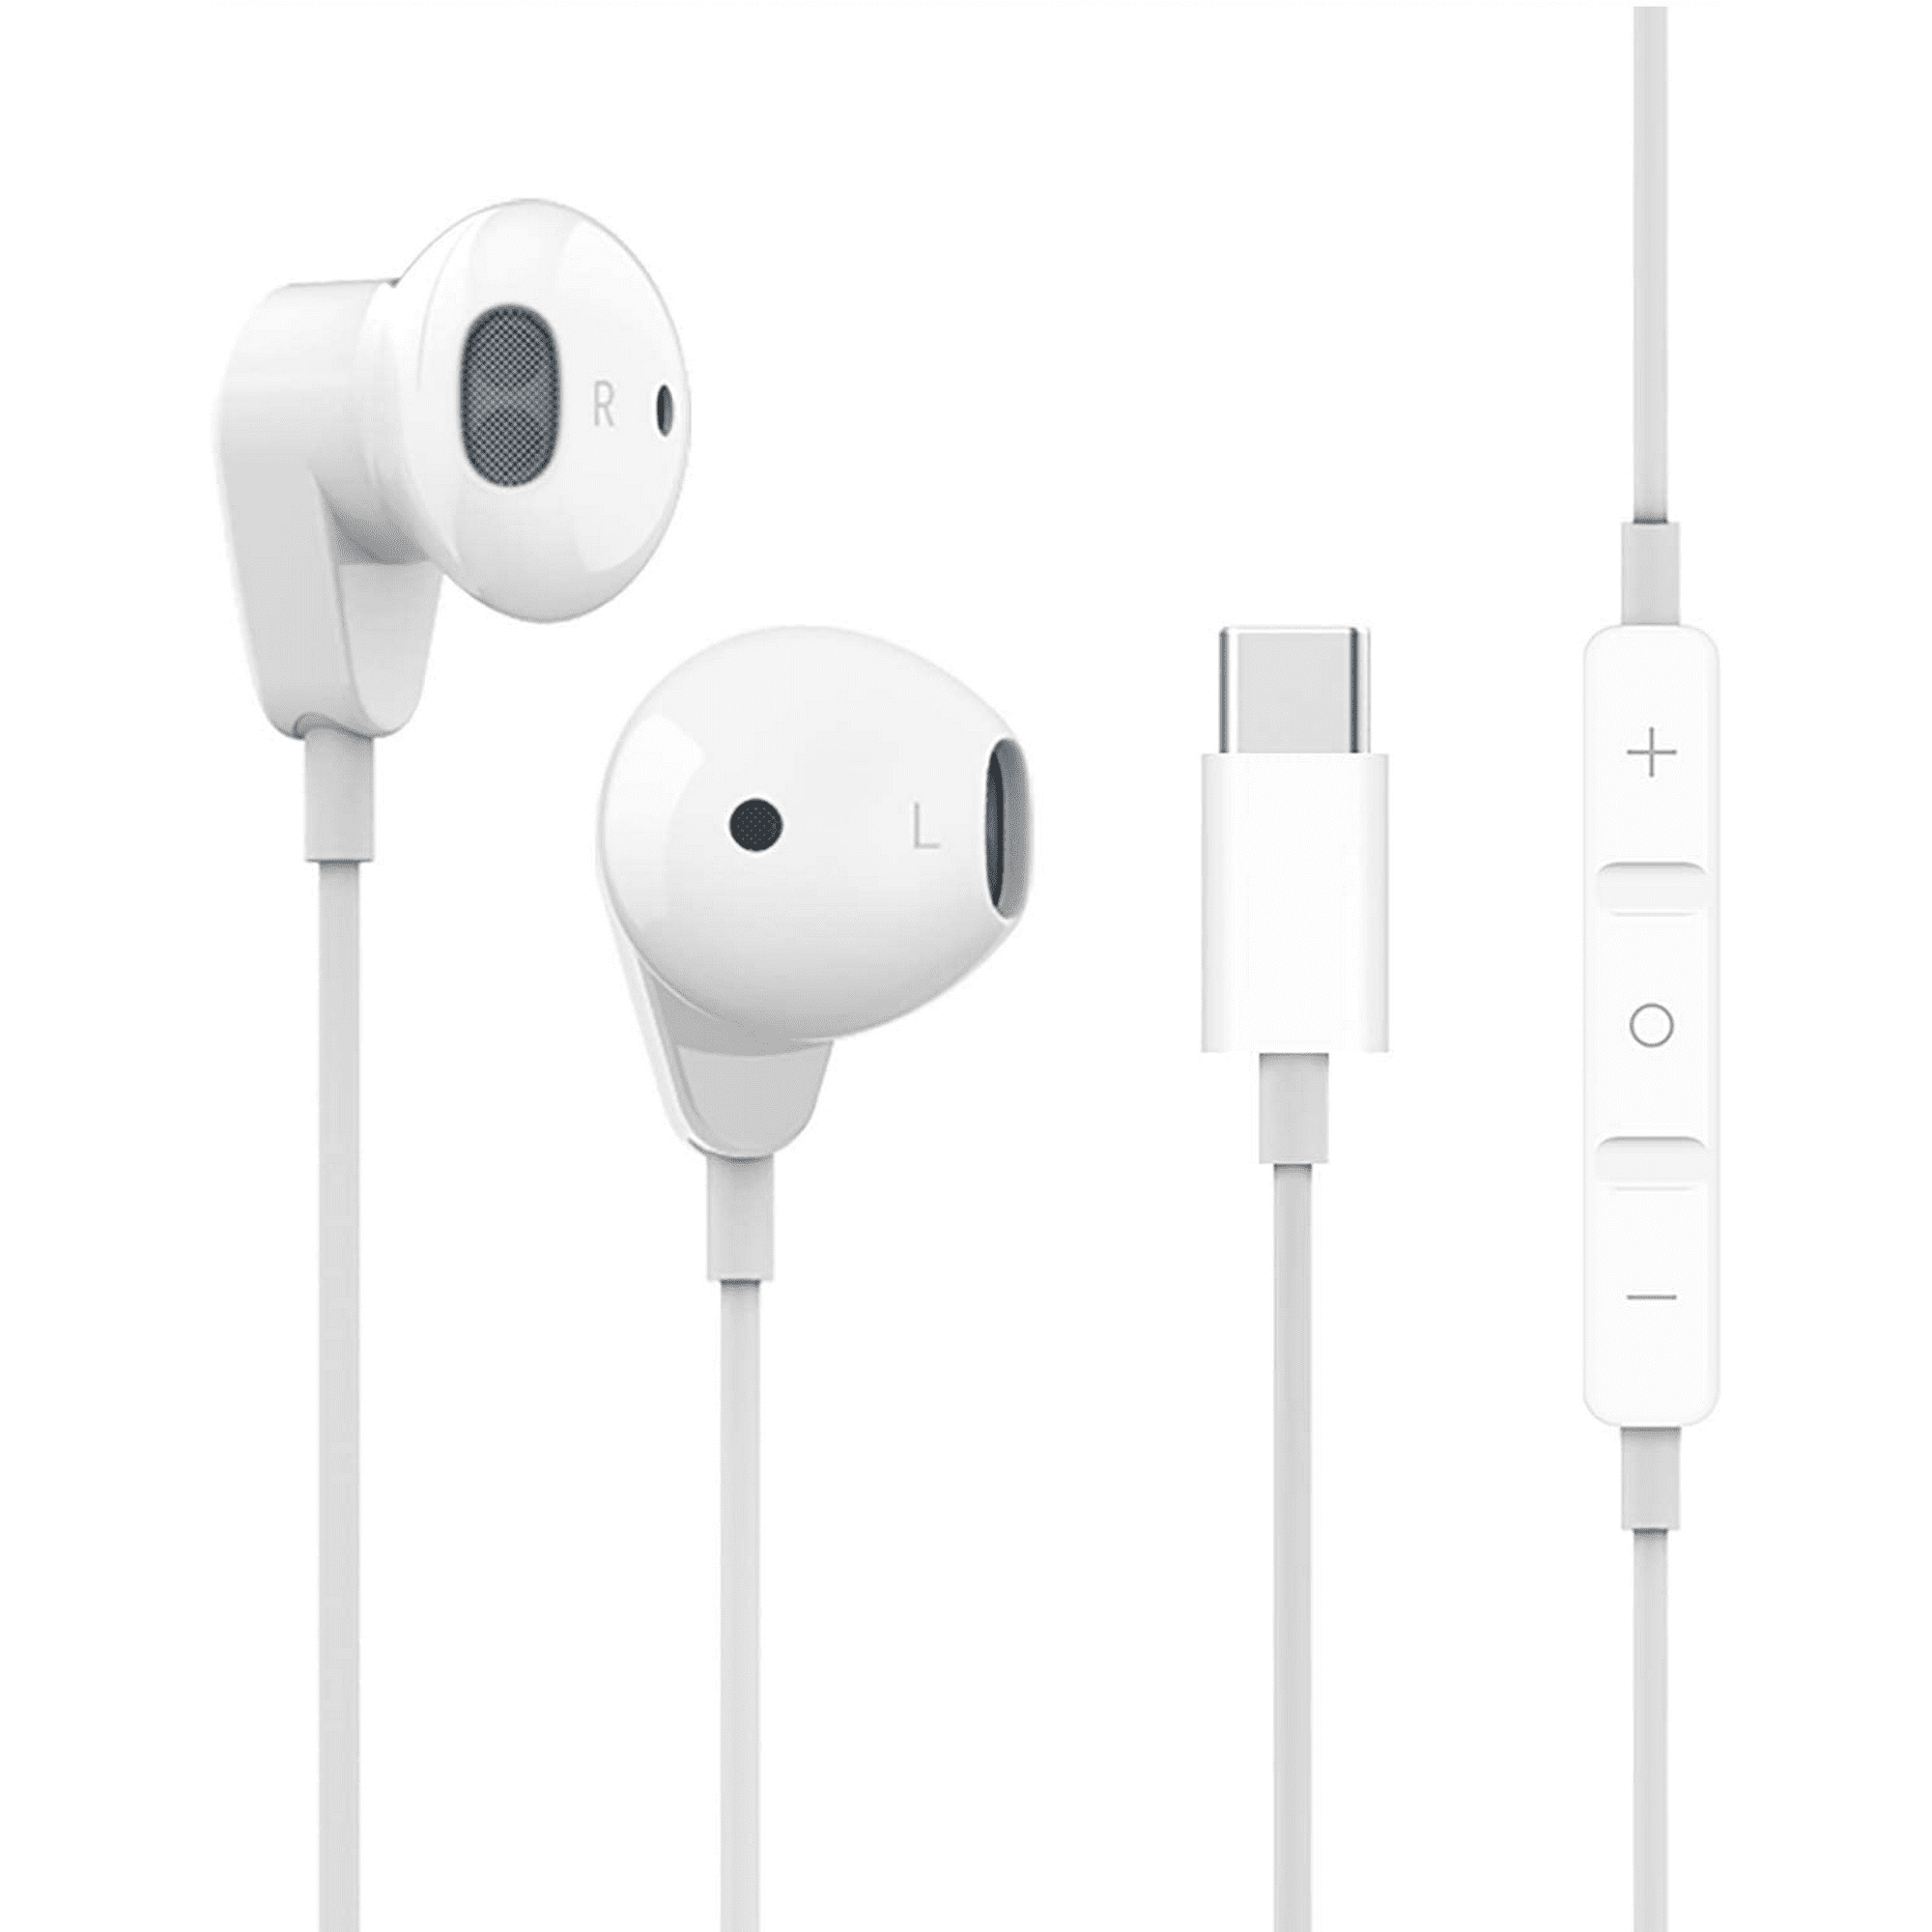 rban Extreme USB Type C Earphones Stereo in-Ear Earbuds with Microphone and Volume Control Compatible with Samsung Galaxy S20 FE 5G - White (US Version with Warranty)